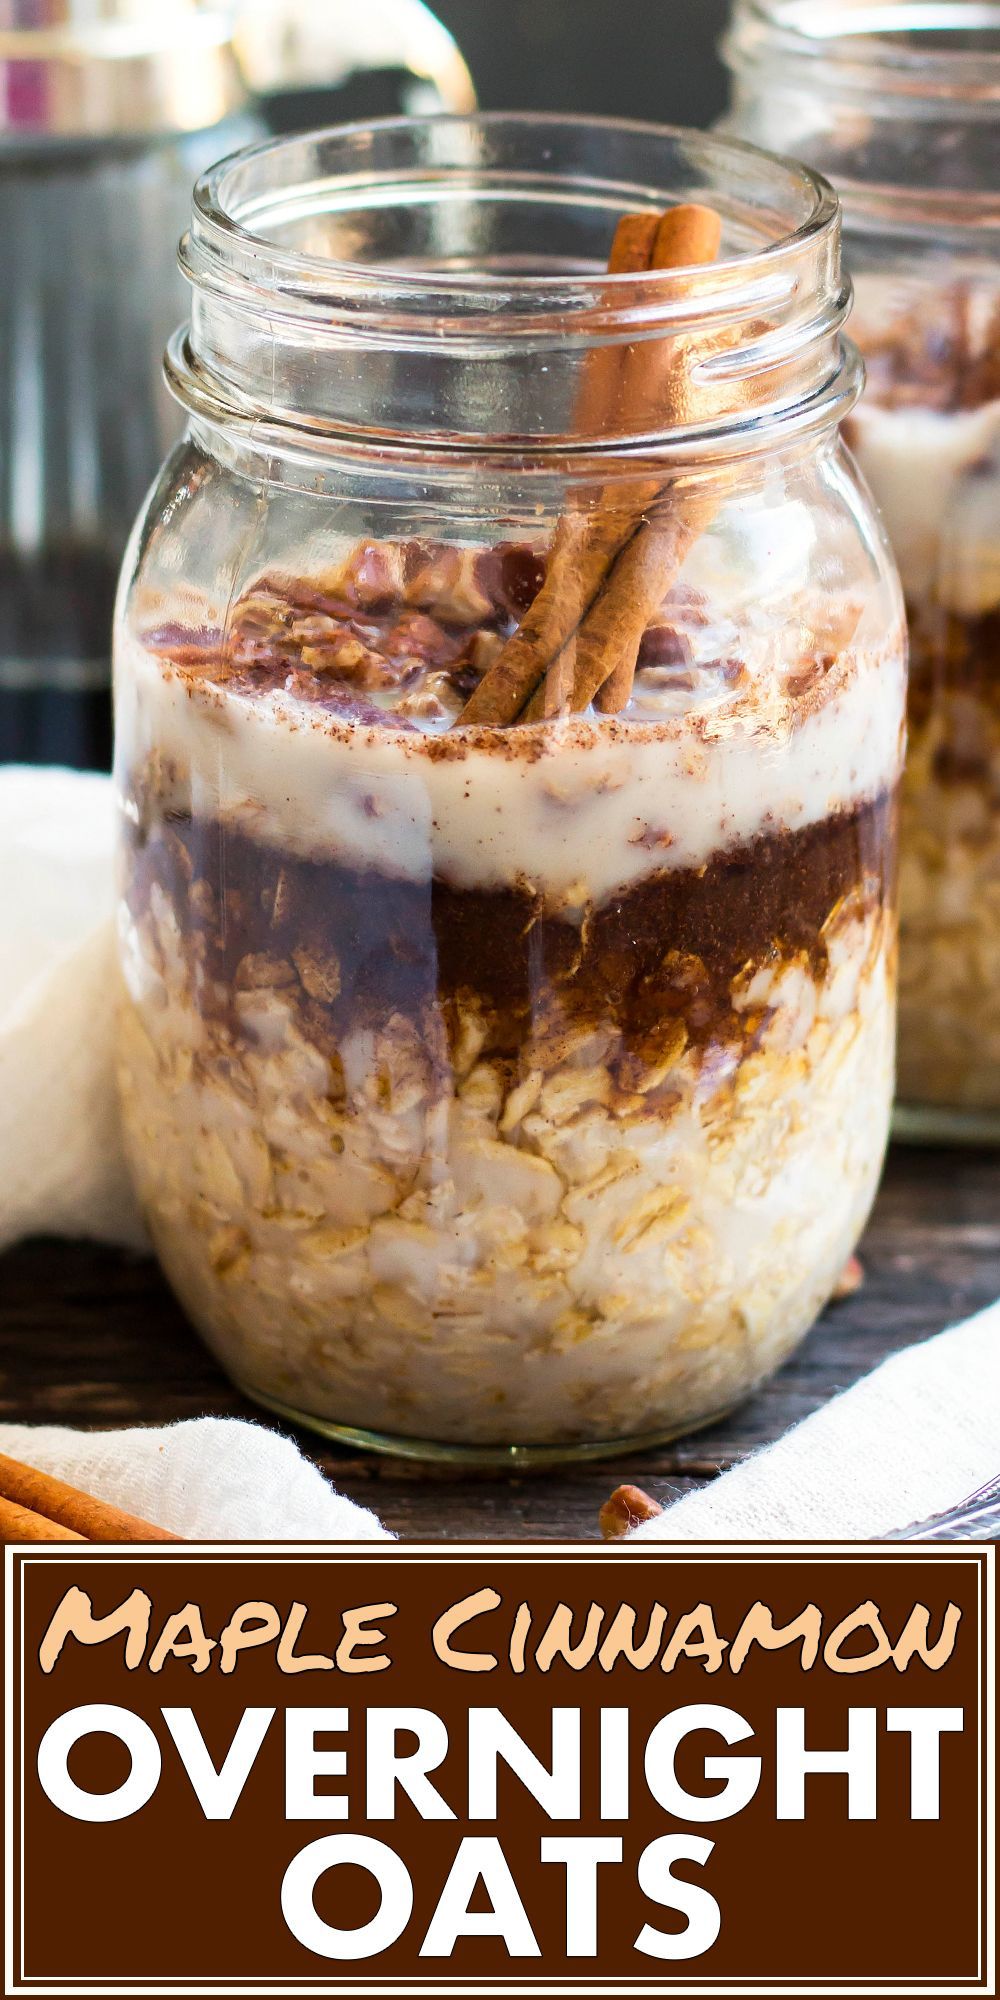 Maple, Brown Sugar and Cinnamon Overnight Oats in a Jar - 19 cake Healthy overnight oats ideas